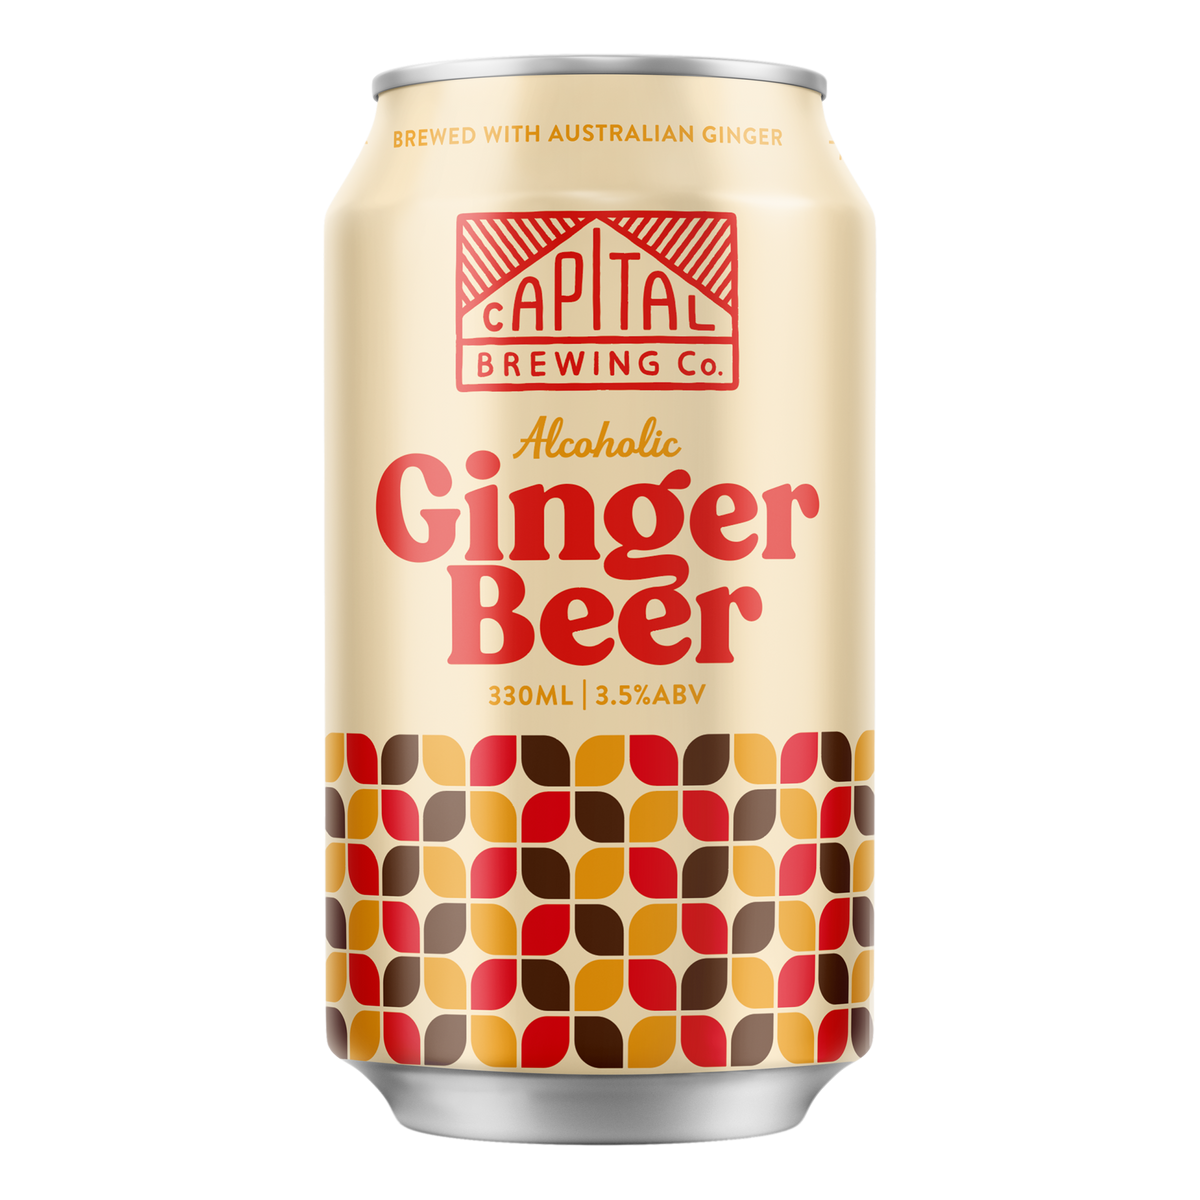 Capital Brewing Co. Alcoholic Ginger Beer 330ml Can Case of 16